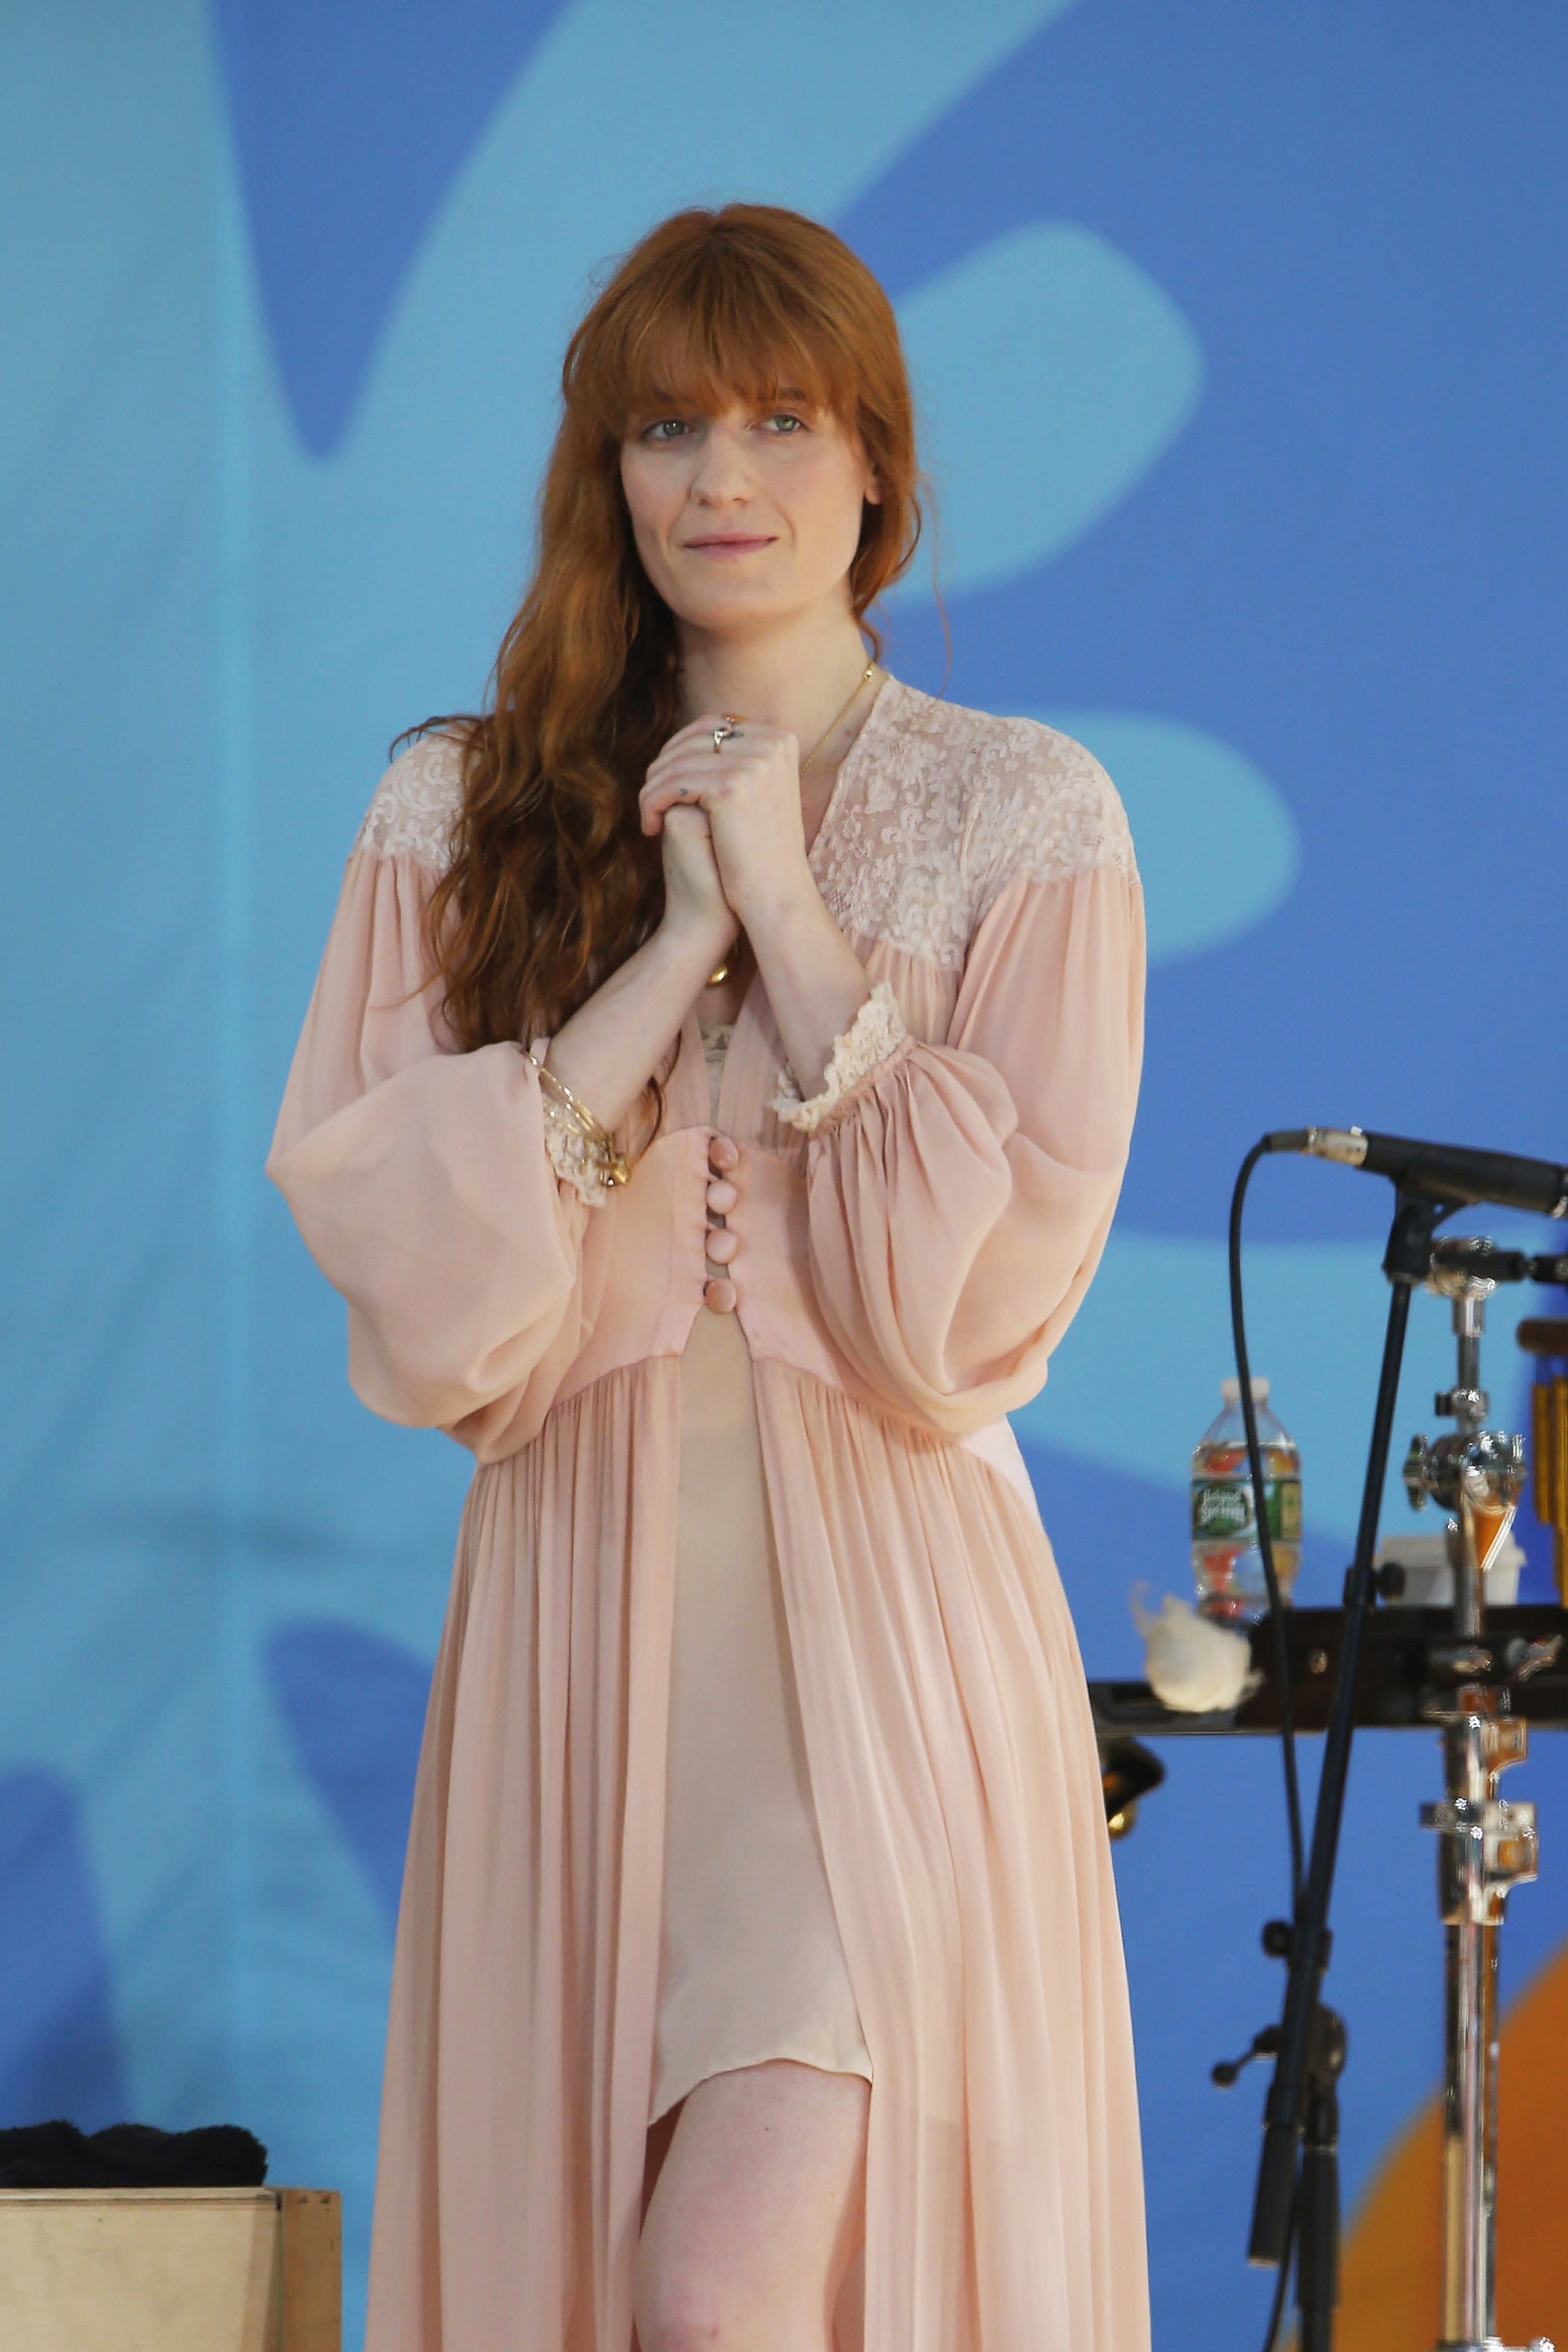 Song To Song Florence Welch / The 10 best Florence + The Machine songs - AXS - Florence welch is penning tunes for a broadway musical version of the great gatsby, being backed by warner music group billionaire len blavatnik and onetime epic records head amanda ghost.